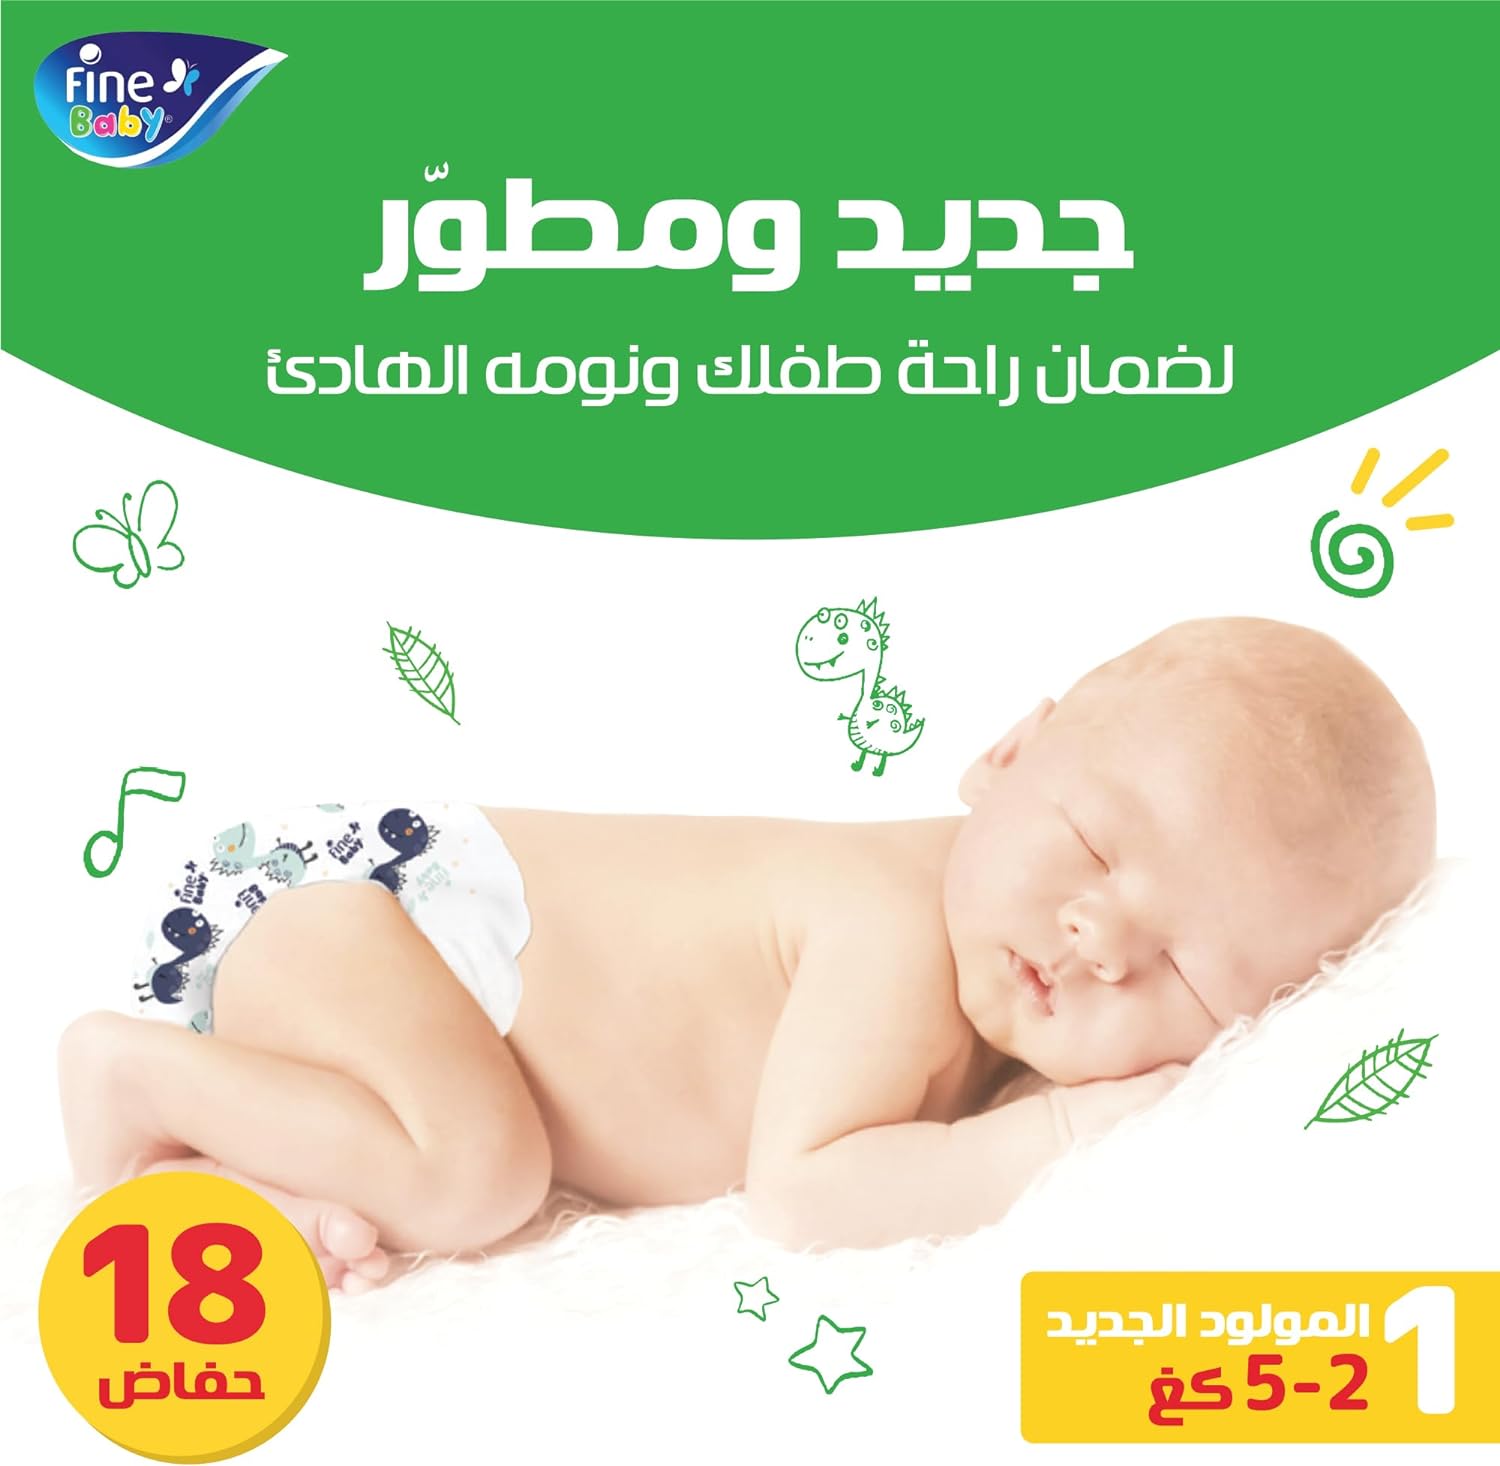 Fine Baby( Size 1 New Born, 2-5 Kg, 18 Diapers)